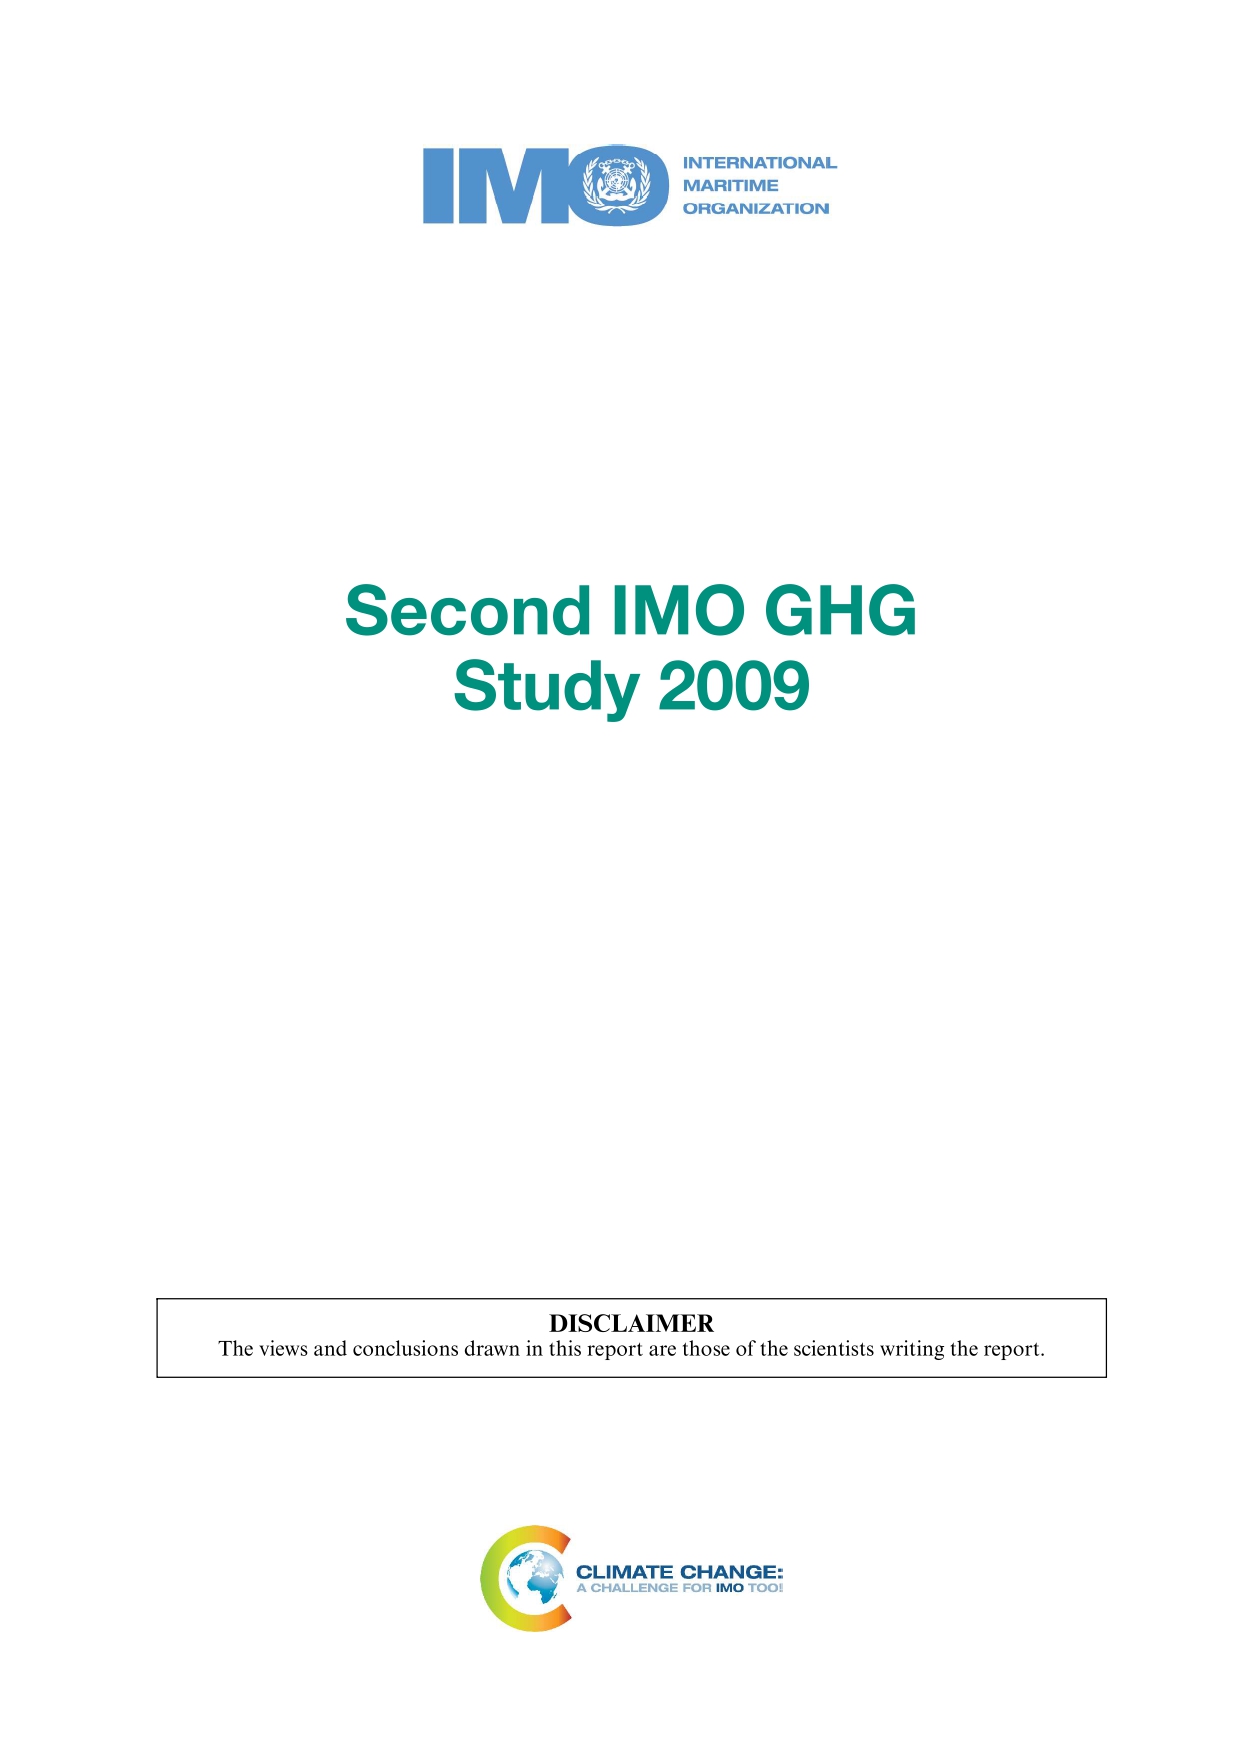 Second IMO GHG study_page-0001.jpg